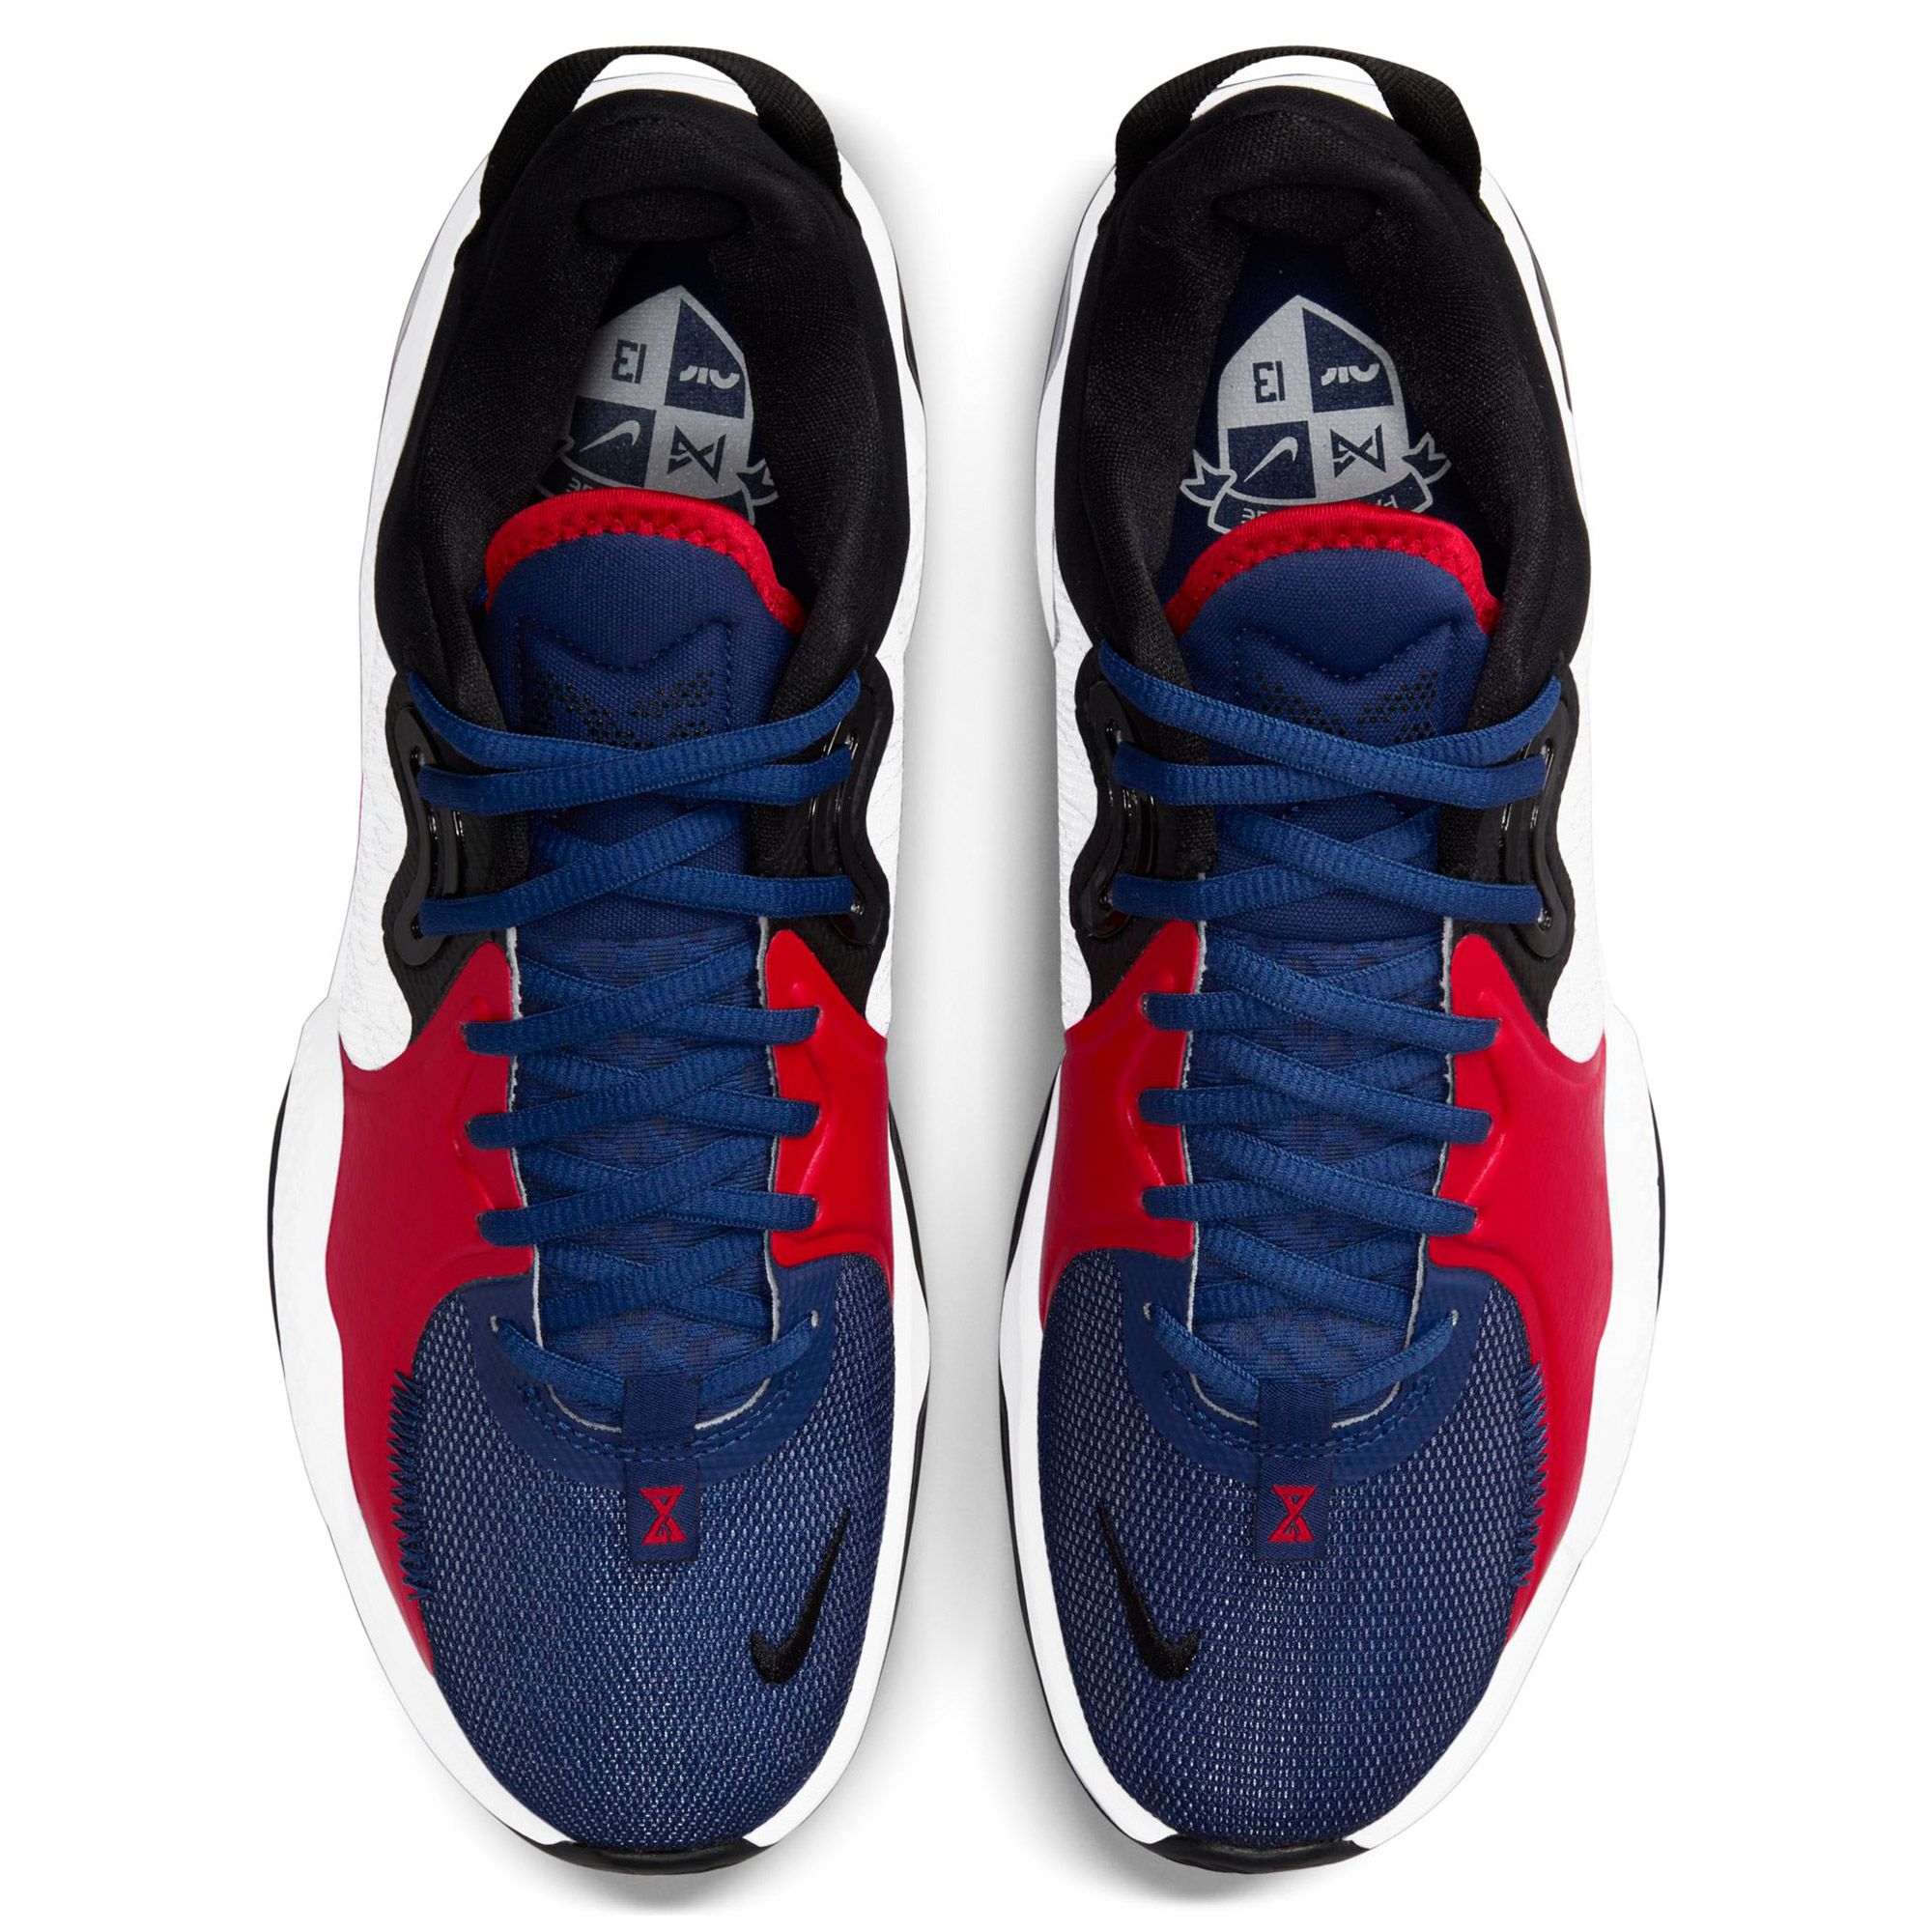 NIKE PG 5 Paul George White Red Blue Basketball Shoes CW3143-101 Sz 9.5